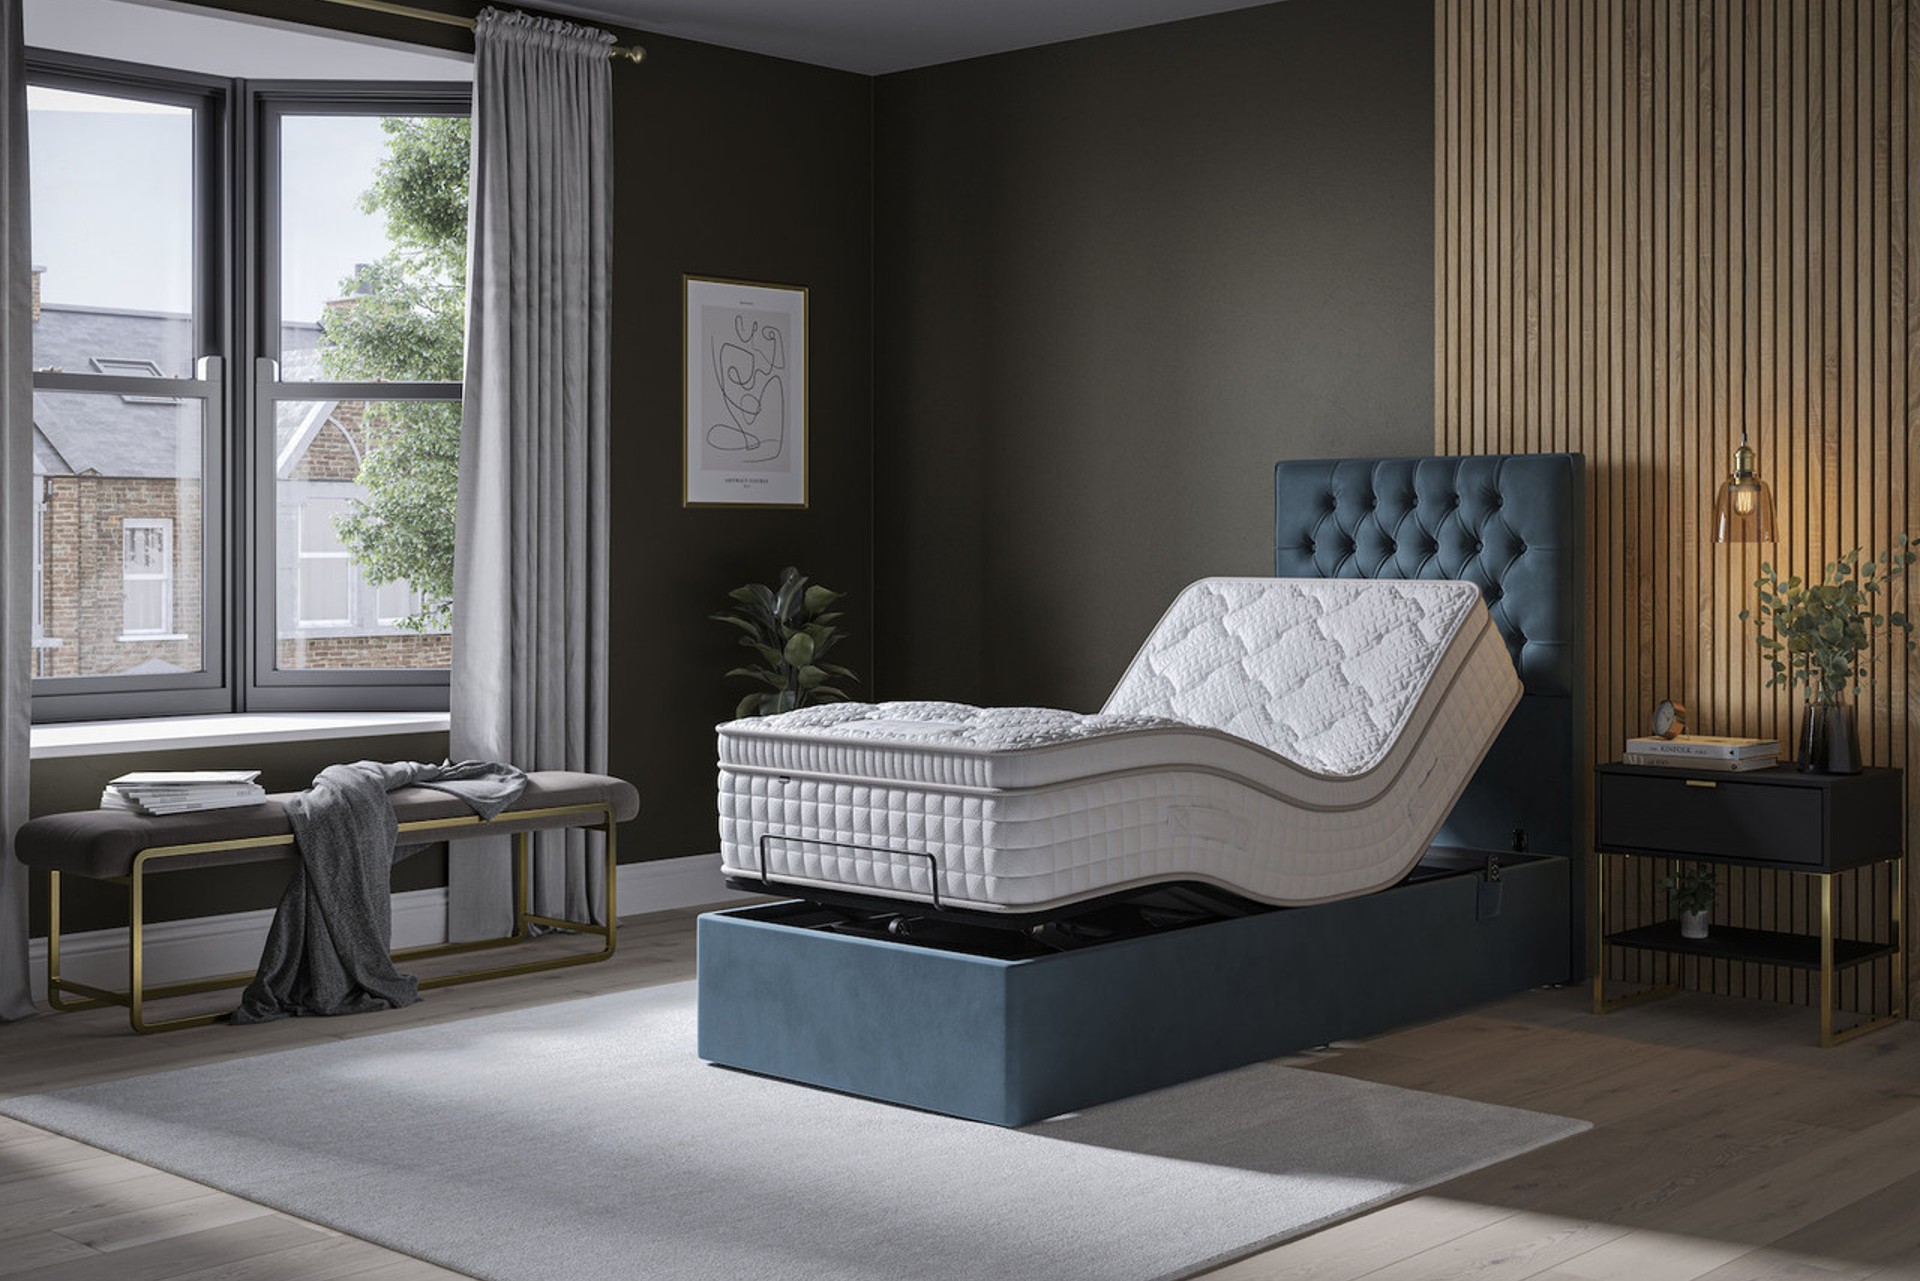 Tech Memory Motion Autobed adjustable bed in bespoke mineral blue